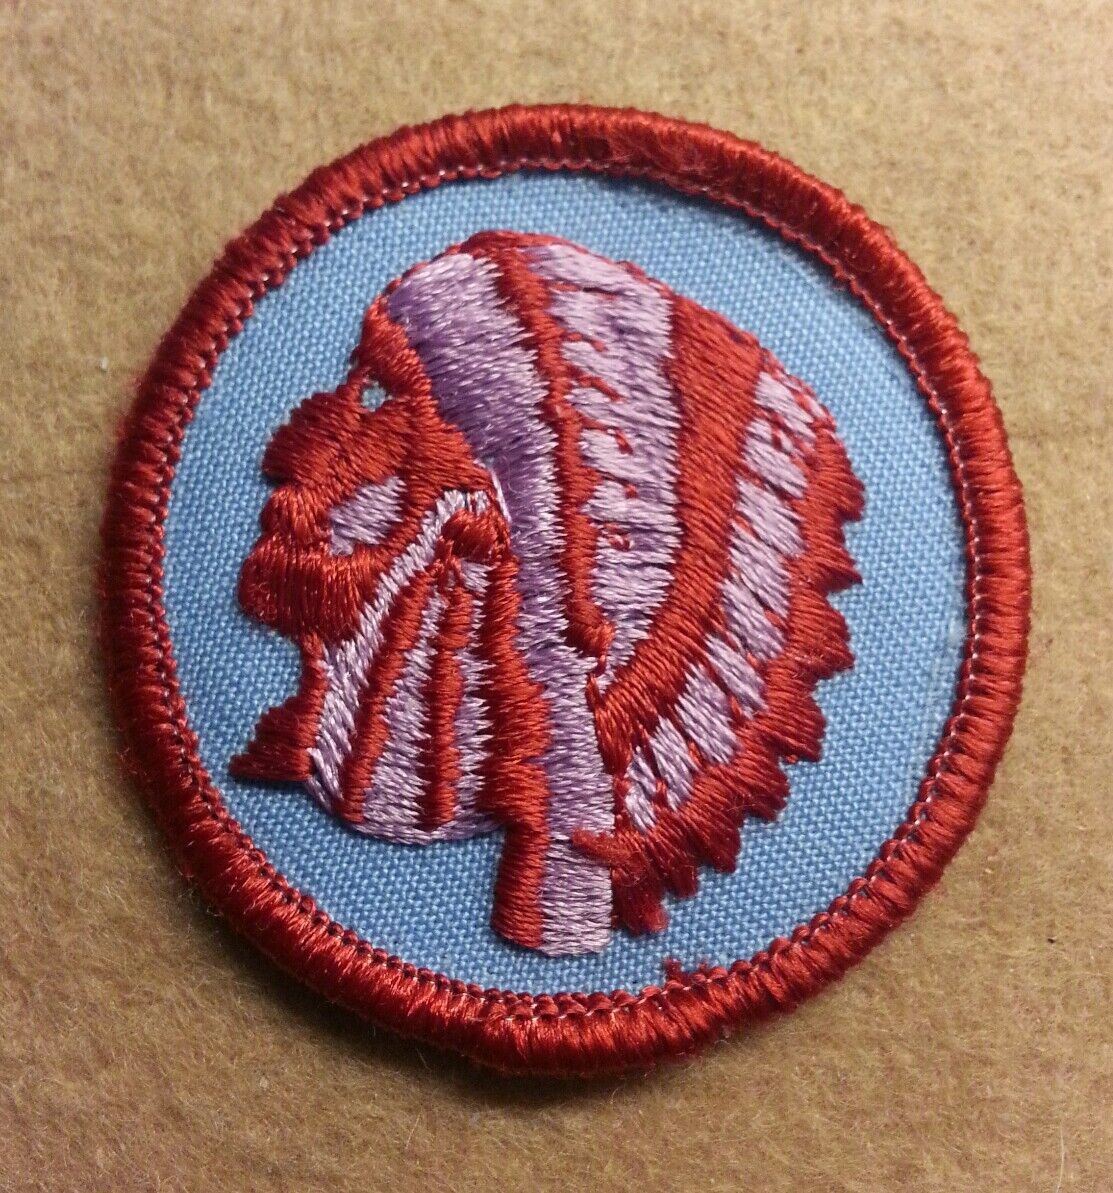  BSA  PATROL MEDALLION PATCH - INDIAN - 1972 - 1989 - PRE-OWNED   A00296